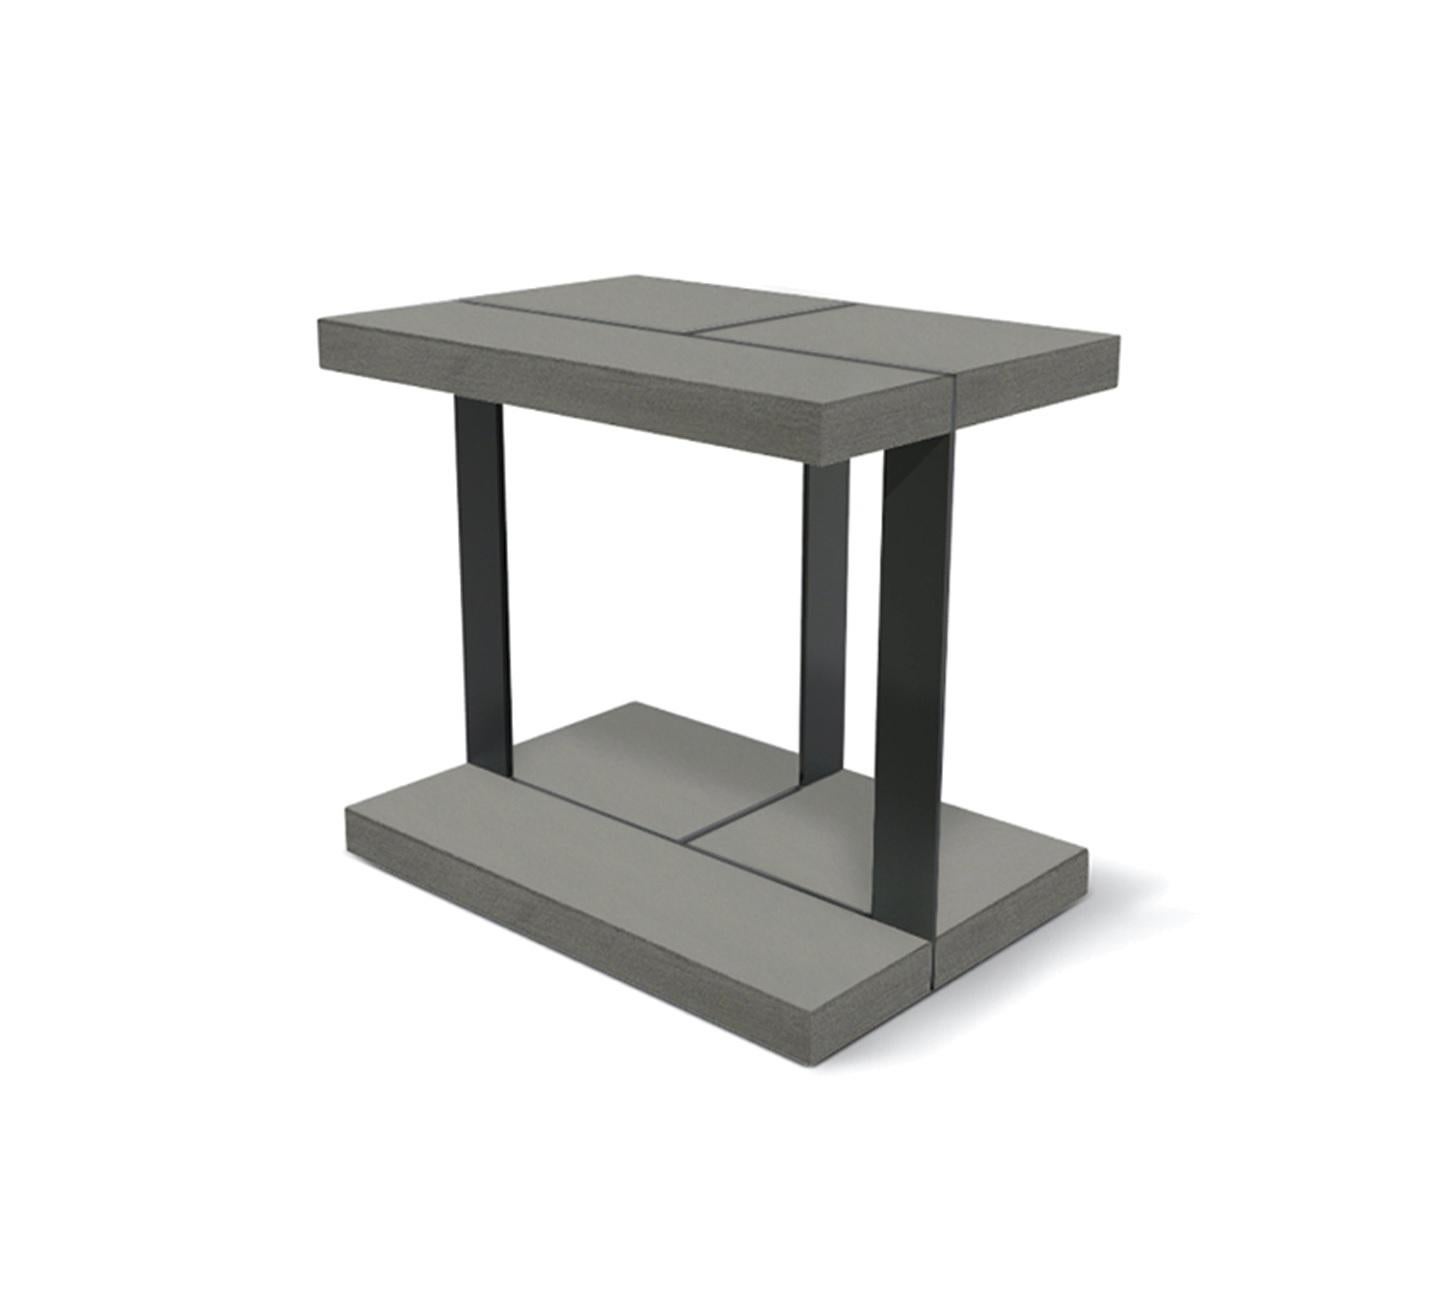 Oak Amondrian side table by LK Edition.
Limited Edition. 
Dimensions: 80 x 60 x H 68 cm 
Materials: Oak and black painted metal. 

It is with the sense of detail and requirement, this research of the exception by the selection of noble